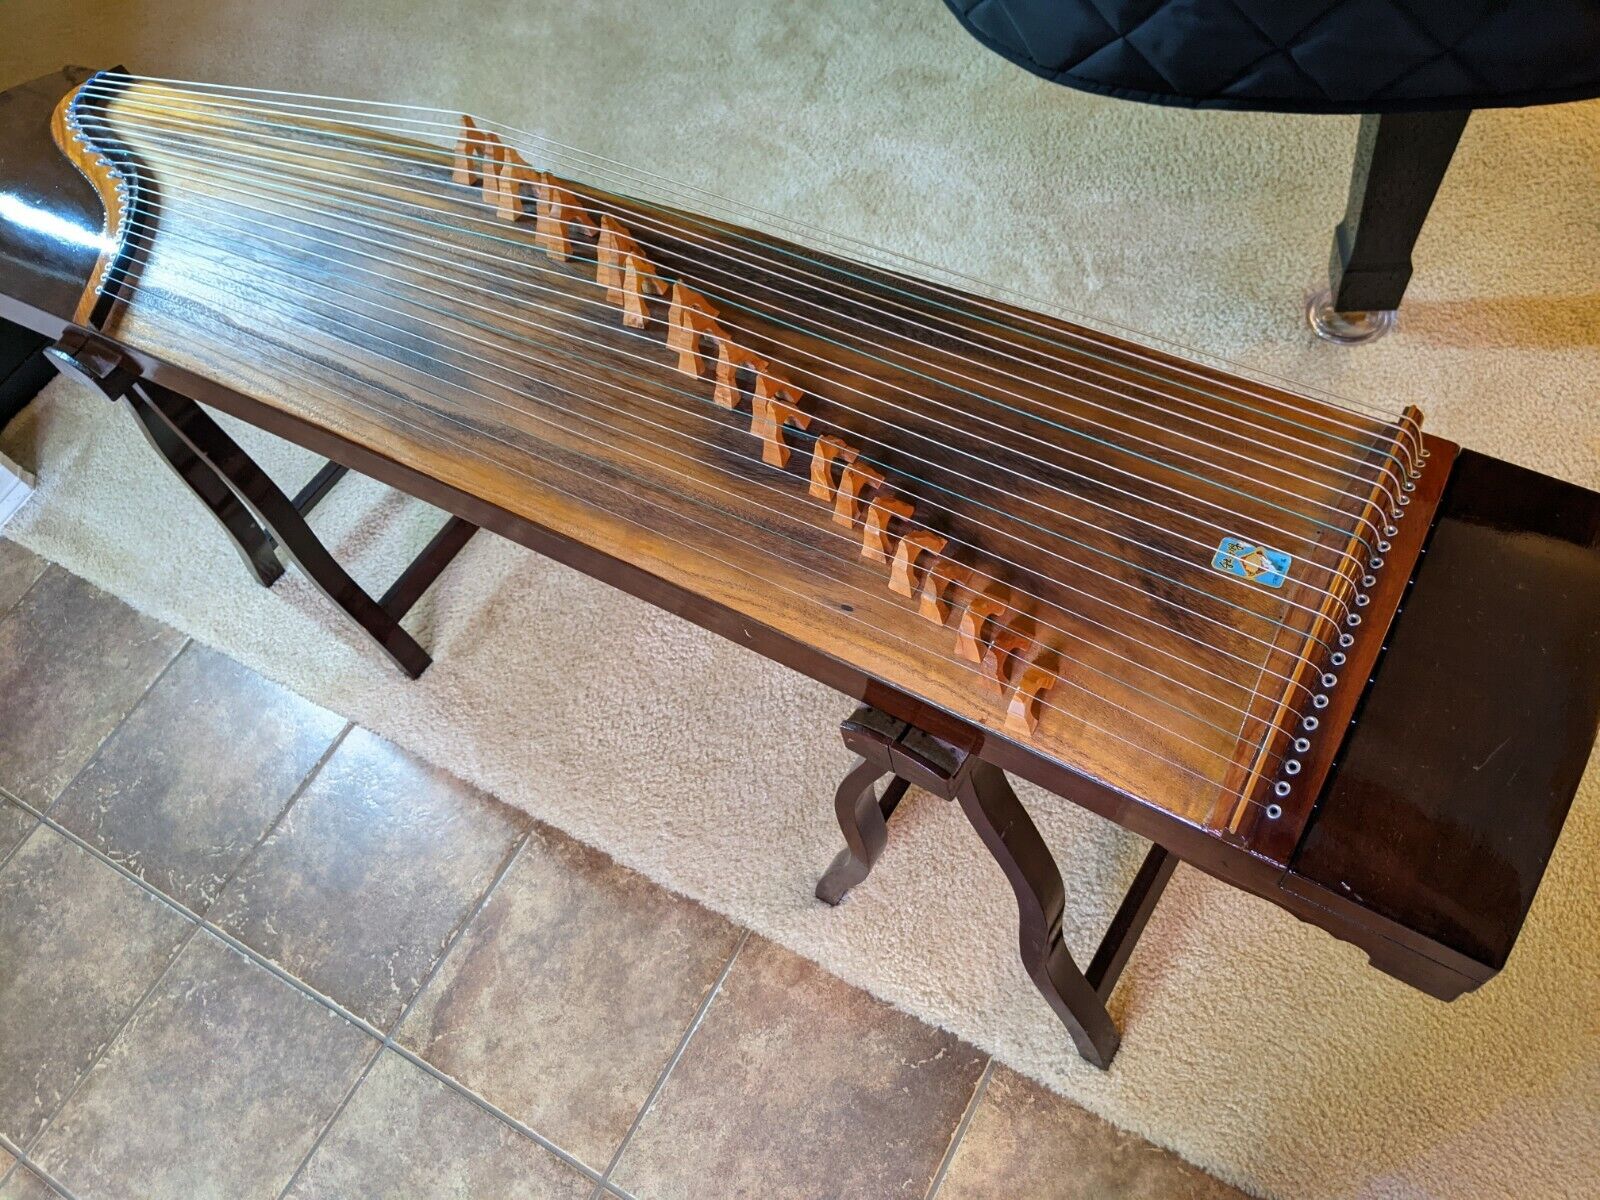 64" 21-string Guzheng, Chinese Zither Harp Instrument With Storage Case & Stands